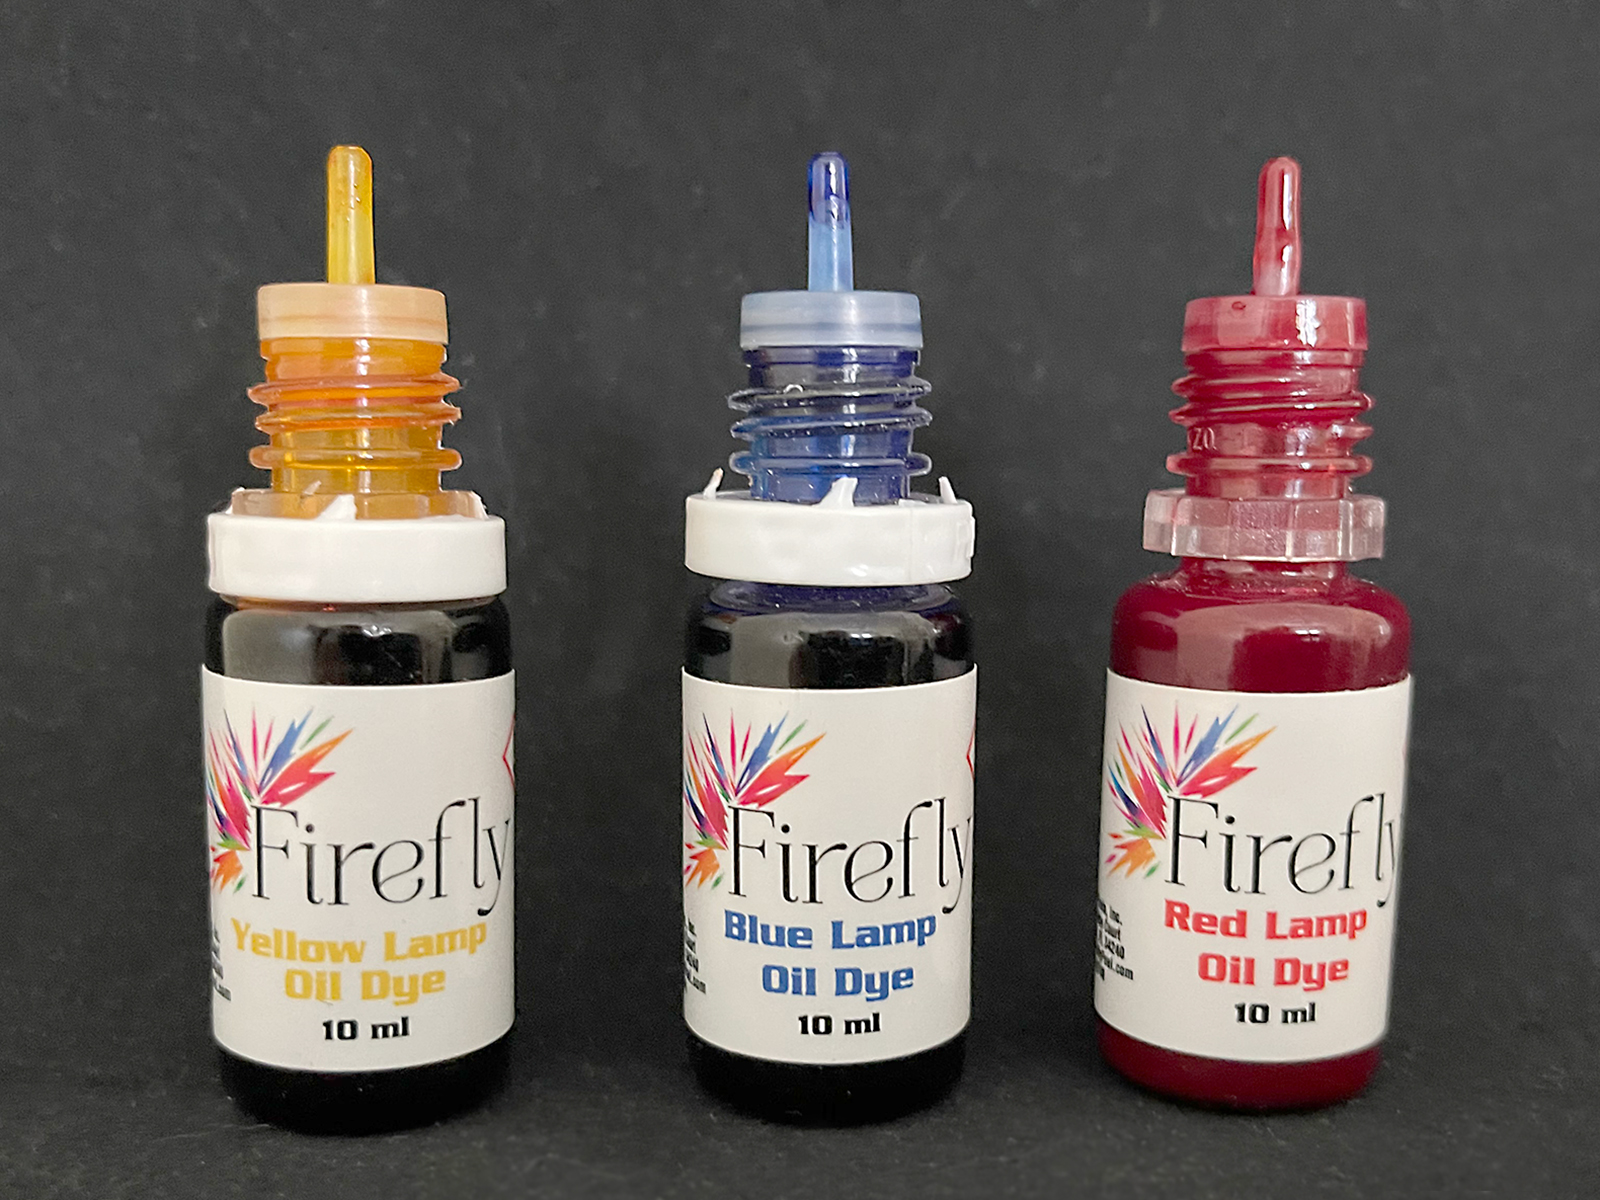 Firefly Colored Lamp Oil Dye - Red, Blue & Yellow. Use in Firefly Liquid Paraffin Lamp Oil. Color Your Lamp Oil Seasonally or